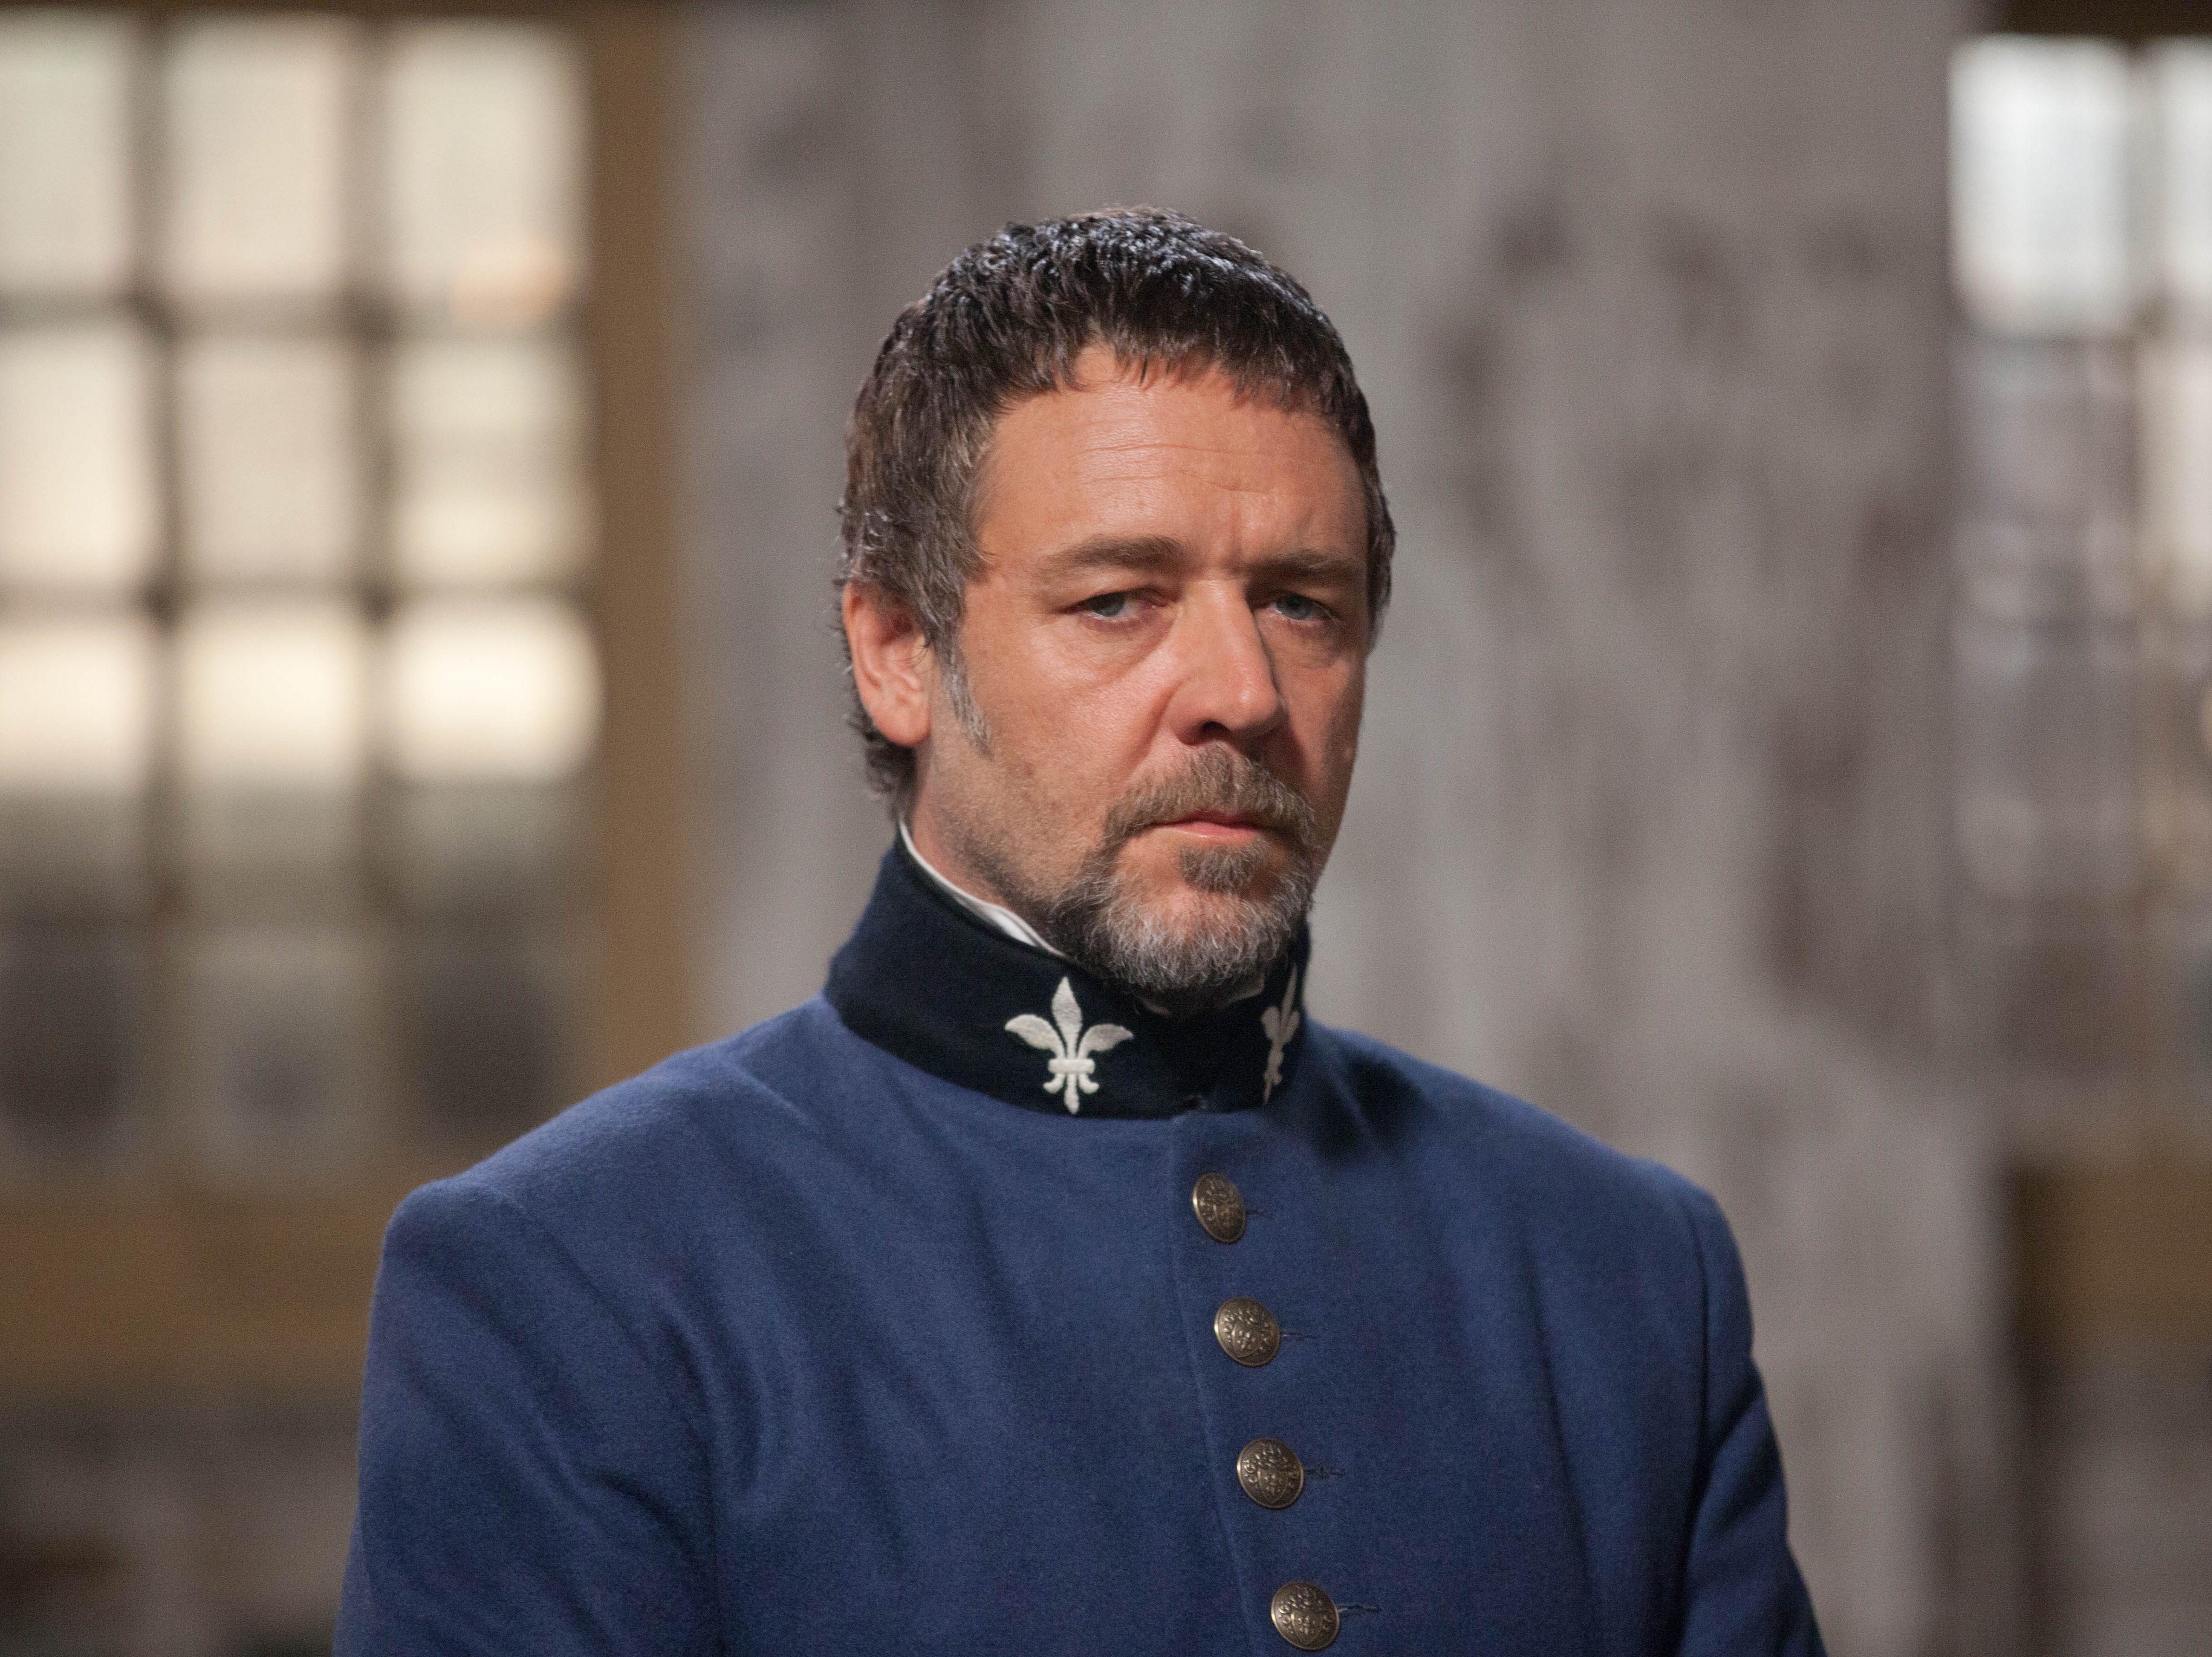 Russell Crowe in ‘Les Miserables'